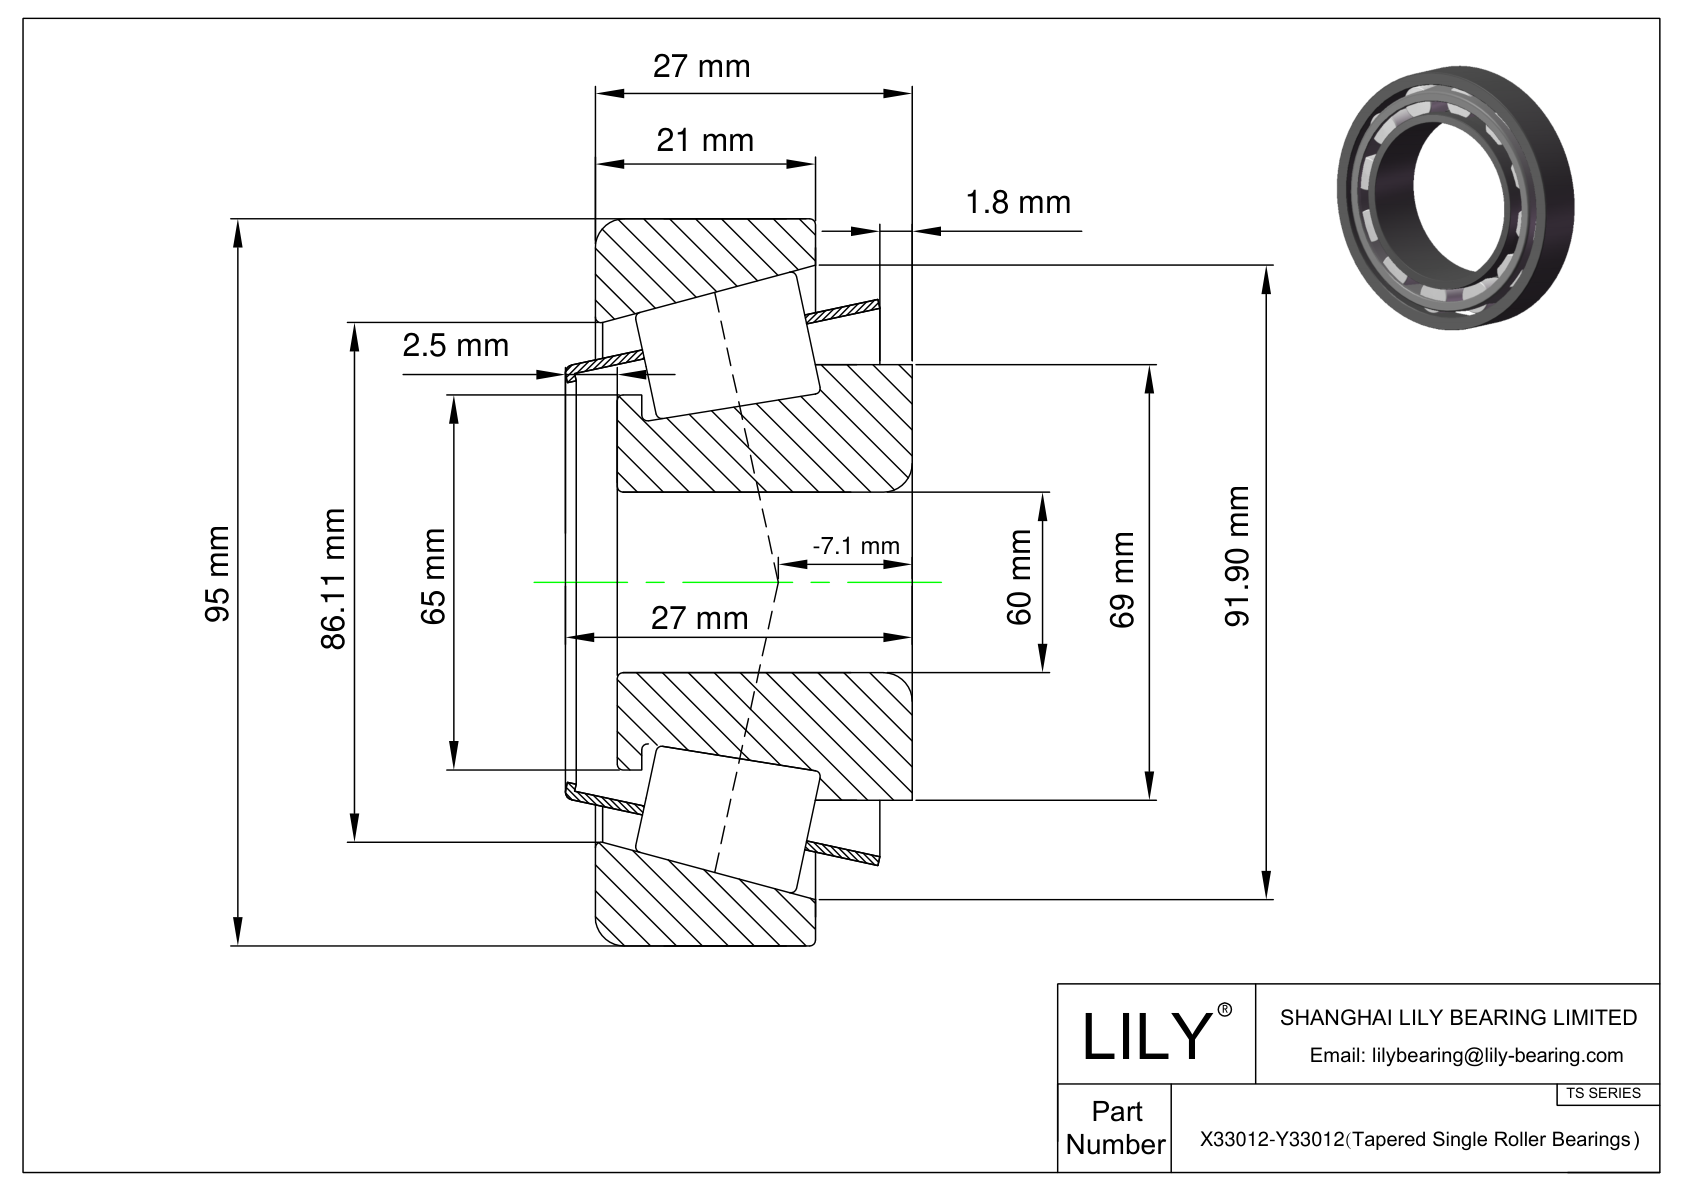 X33012-Y33012 TS (Tapered Single Roller Bearings) (Metric) cad drawing